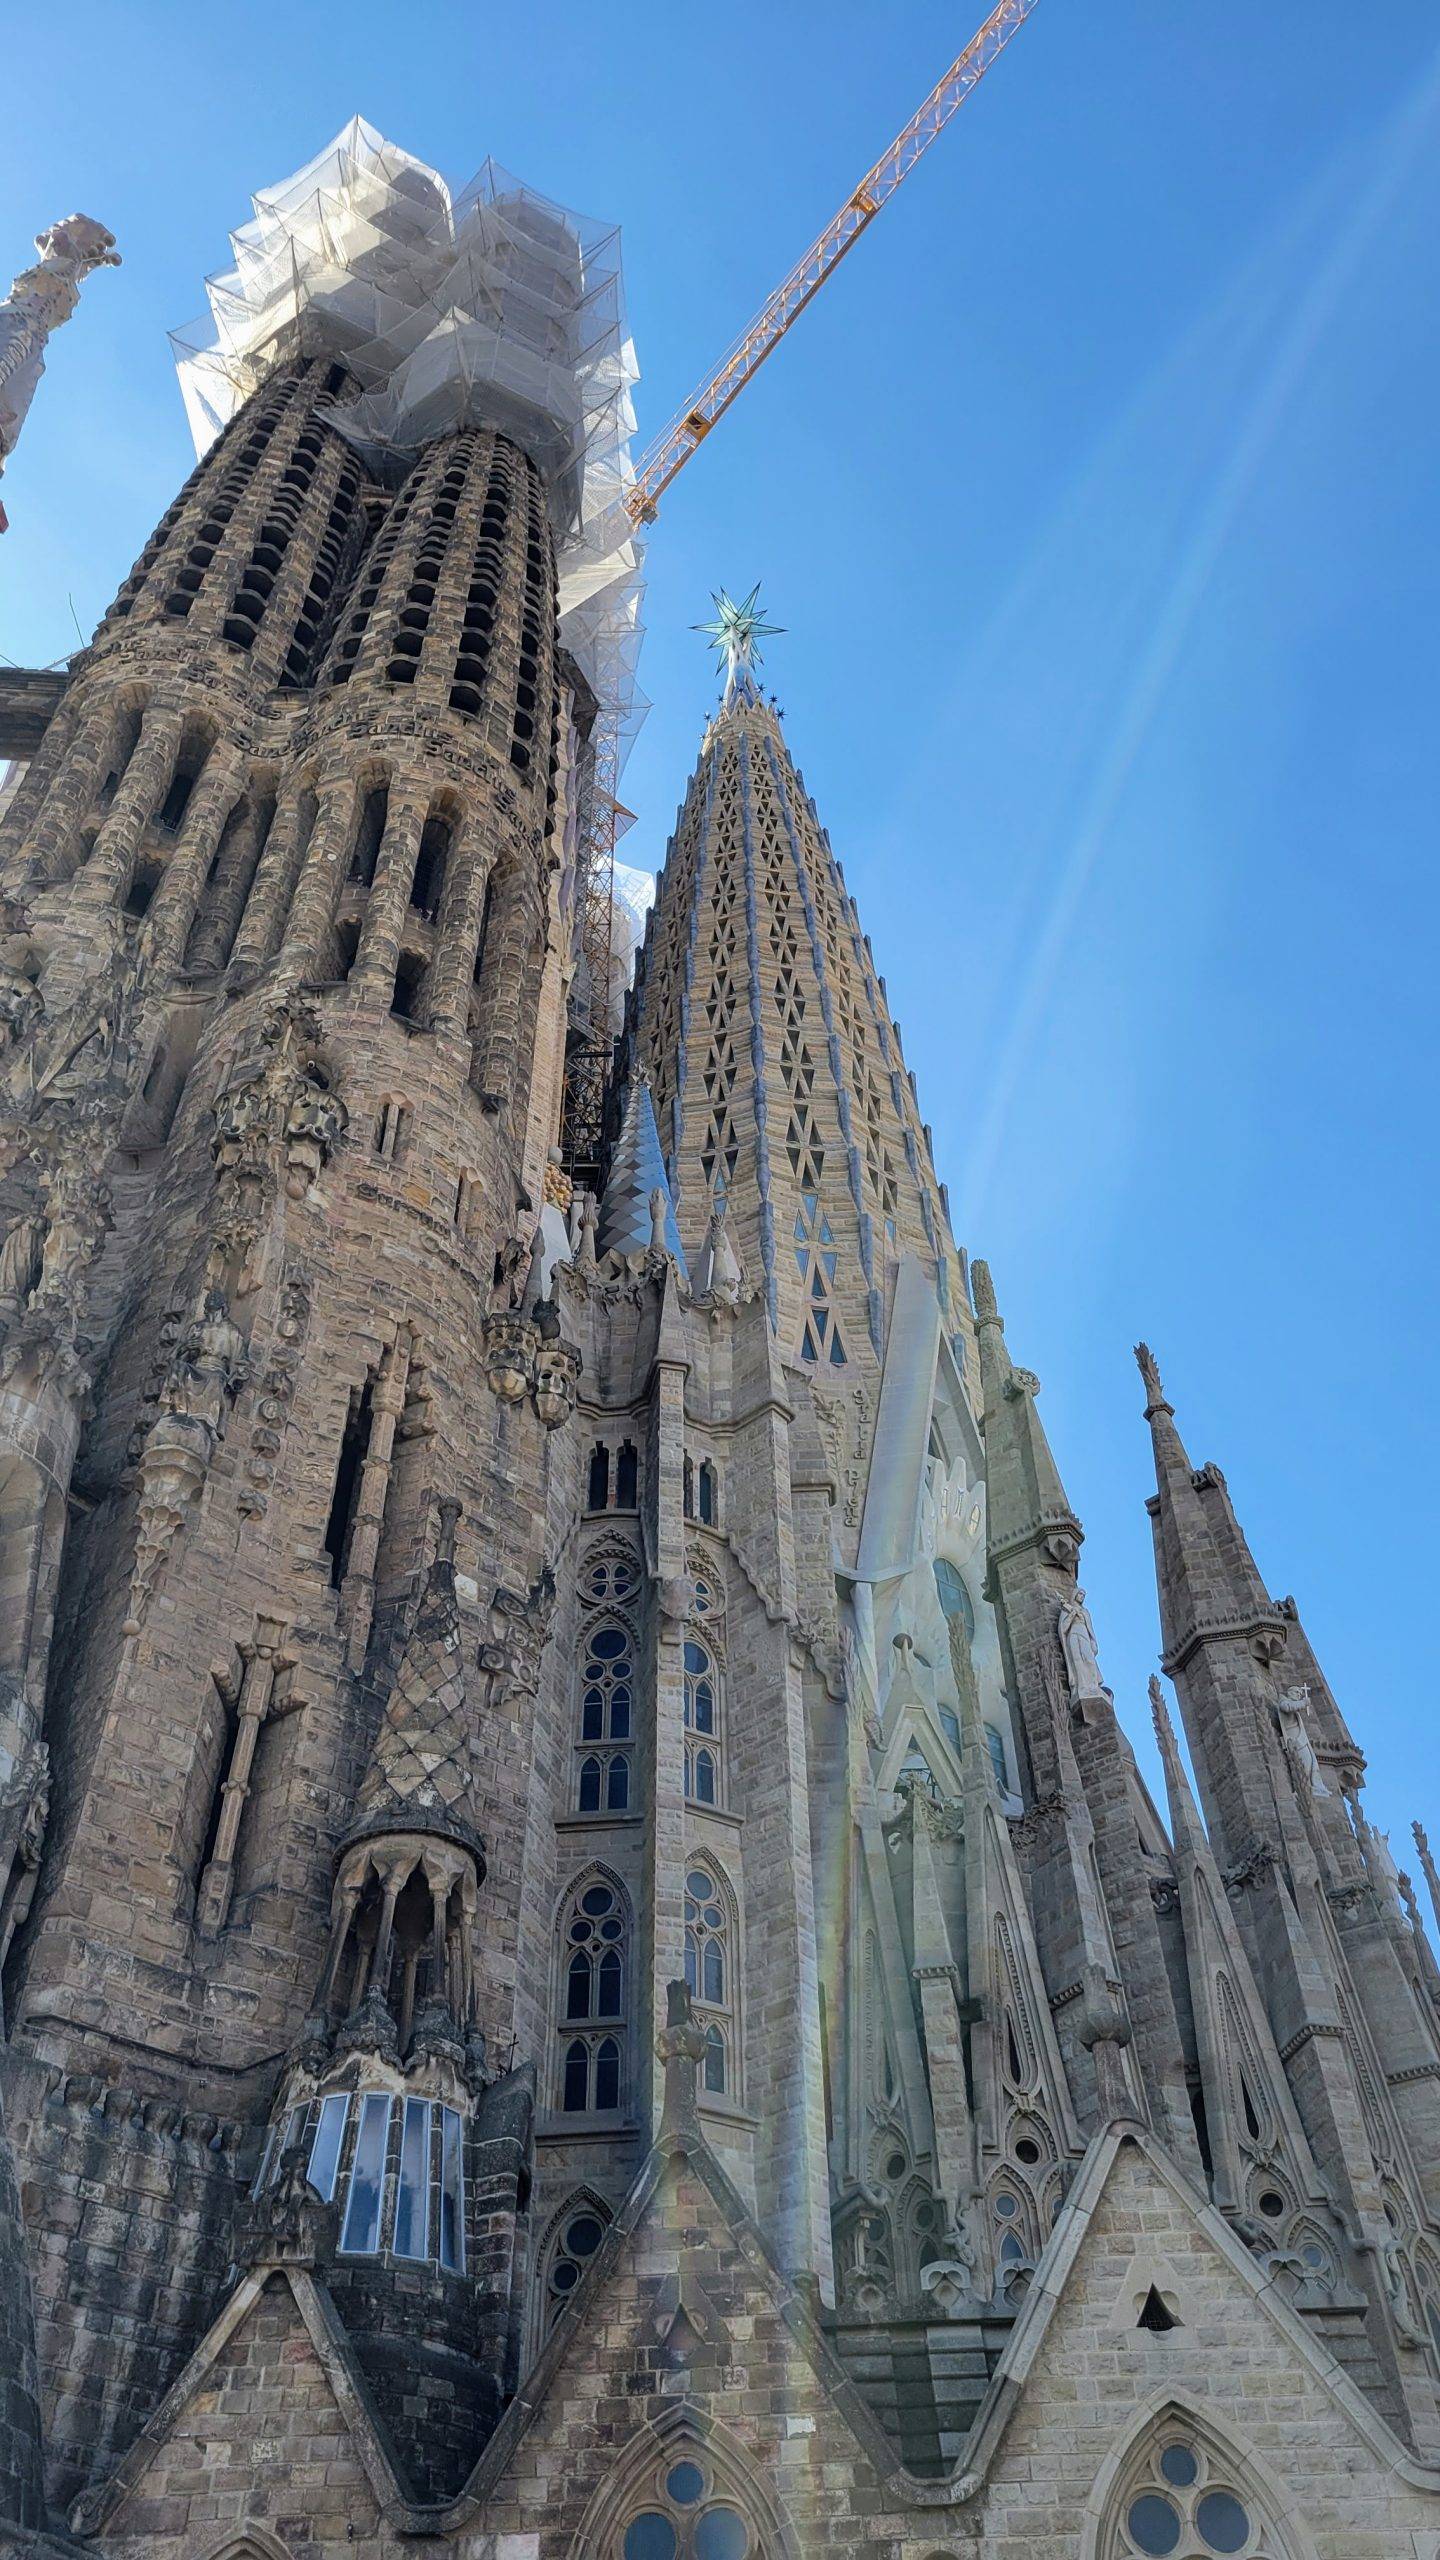 Mary Tower and central towers on La Sagrada Familia